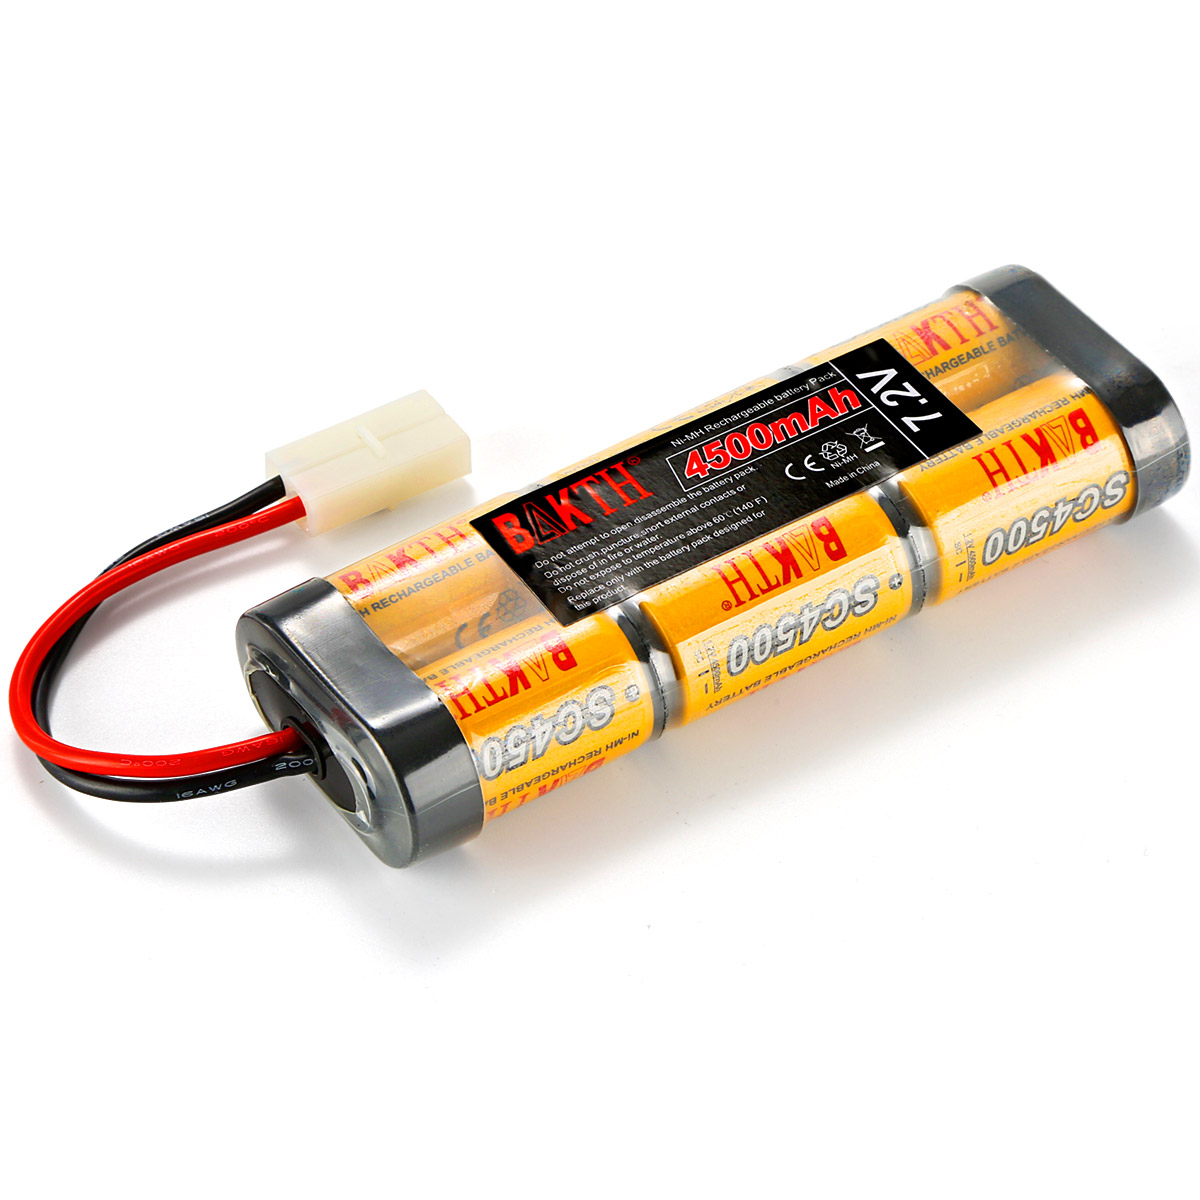 BAKTH 7.2V 4500MAH 6 Cell NiMH for Car Batteries & Accessories